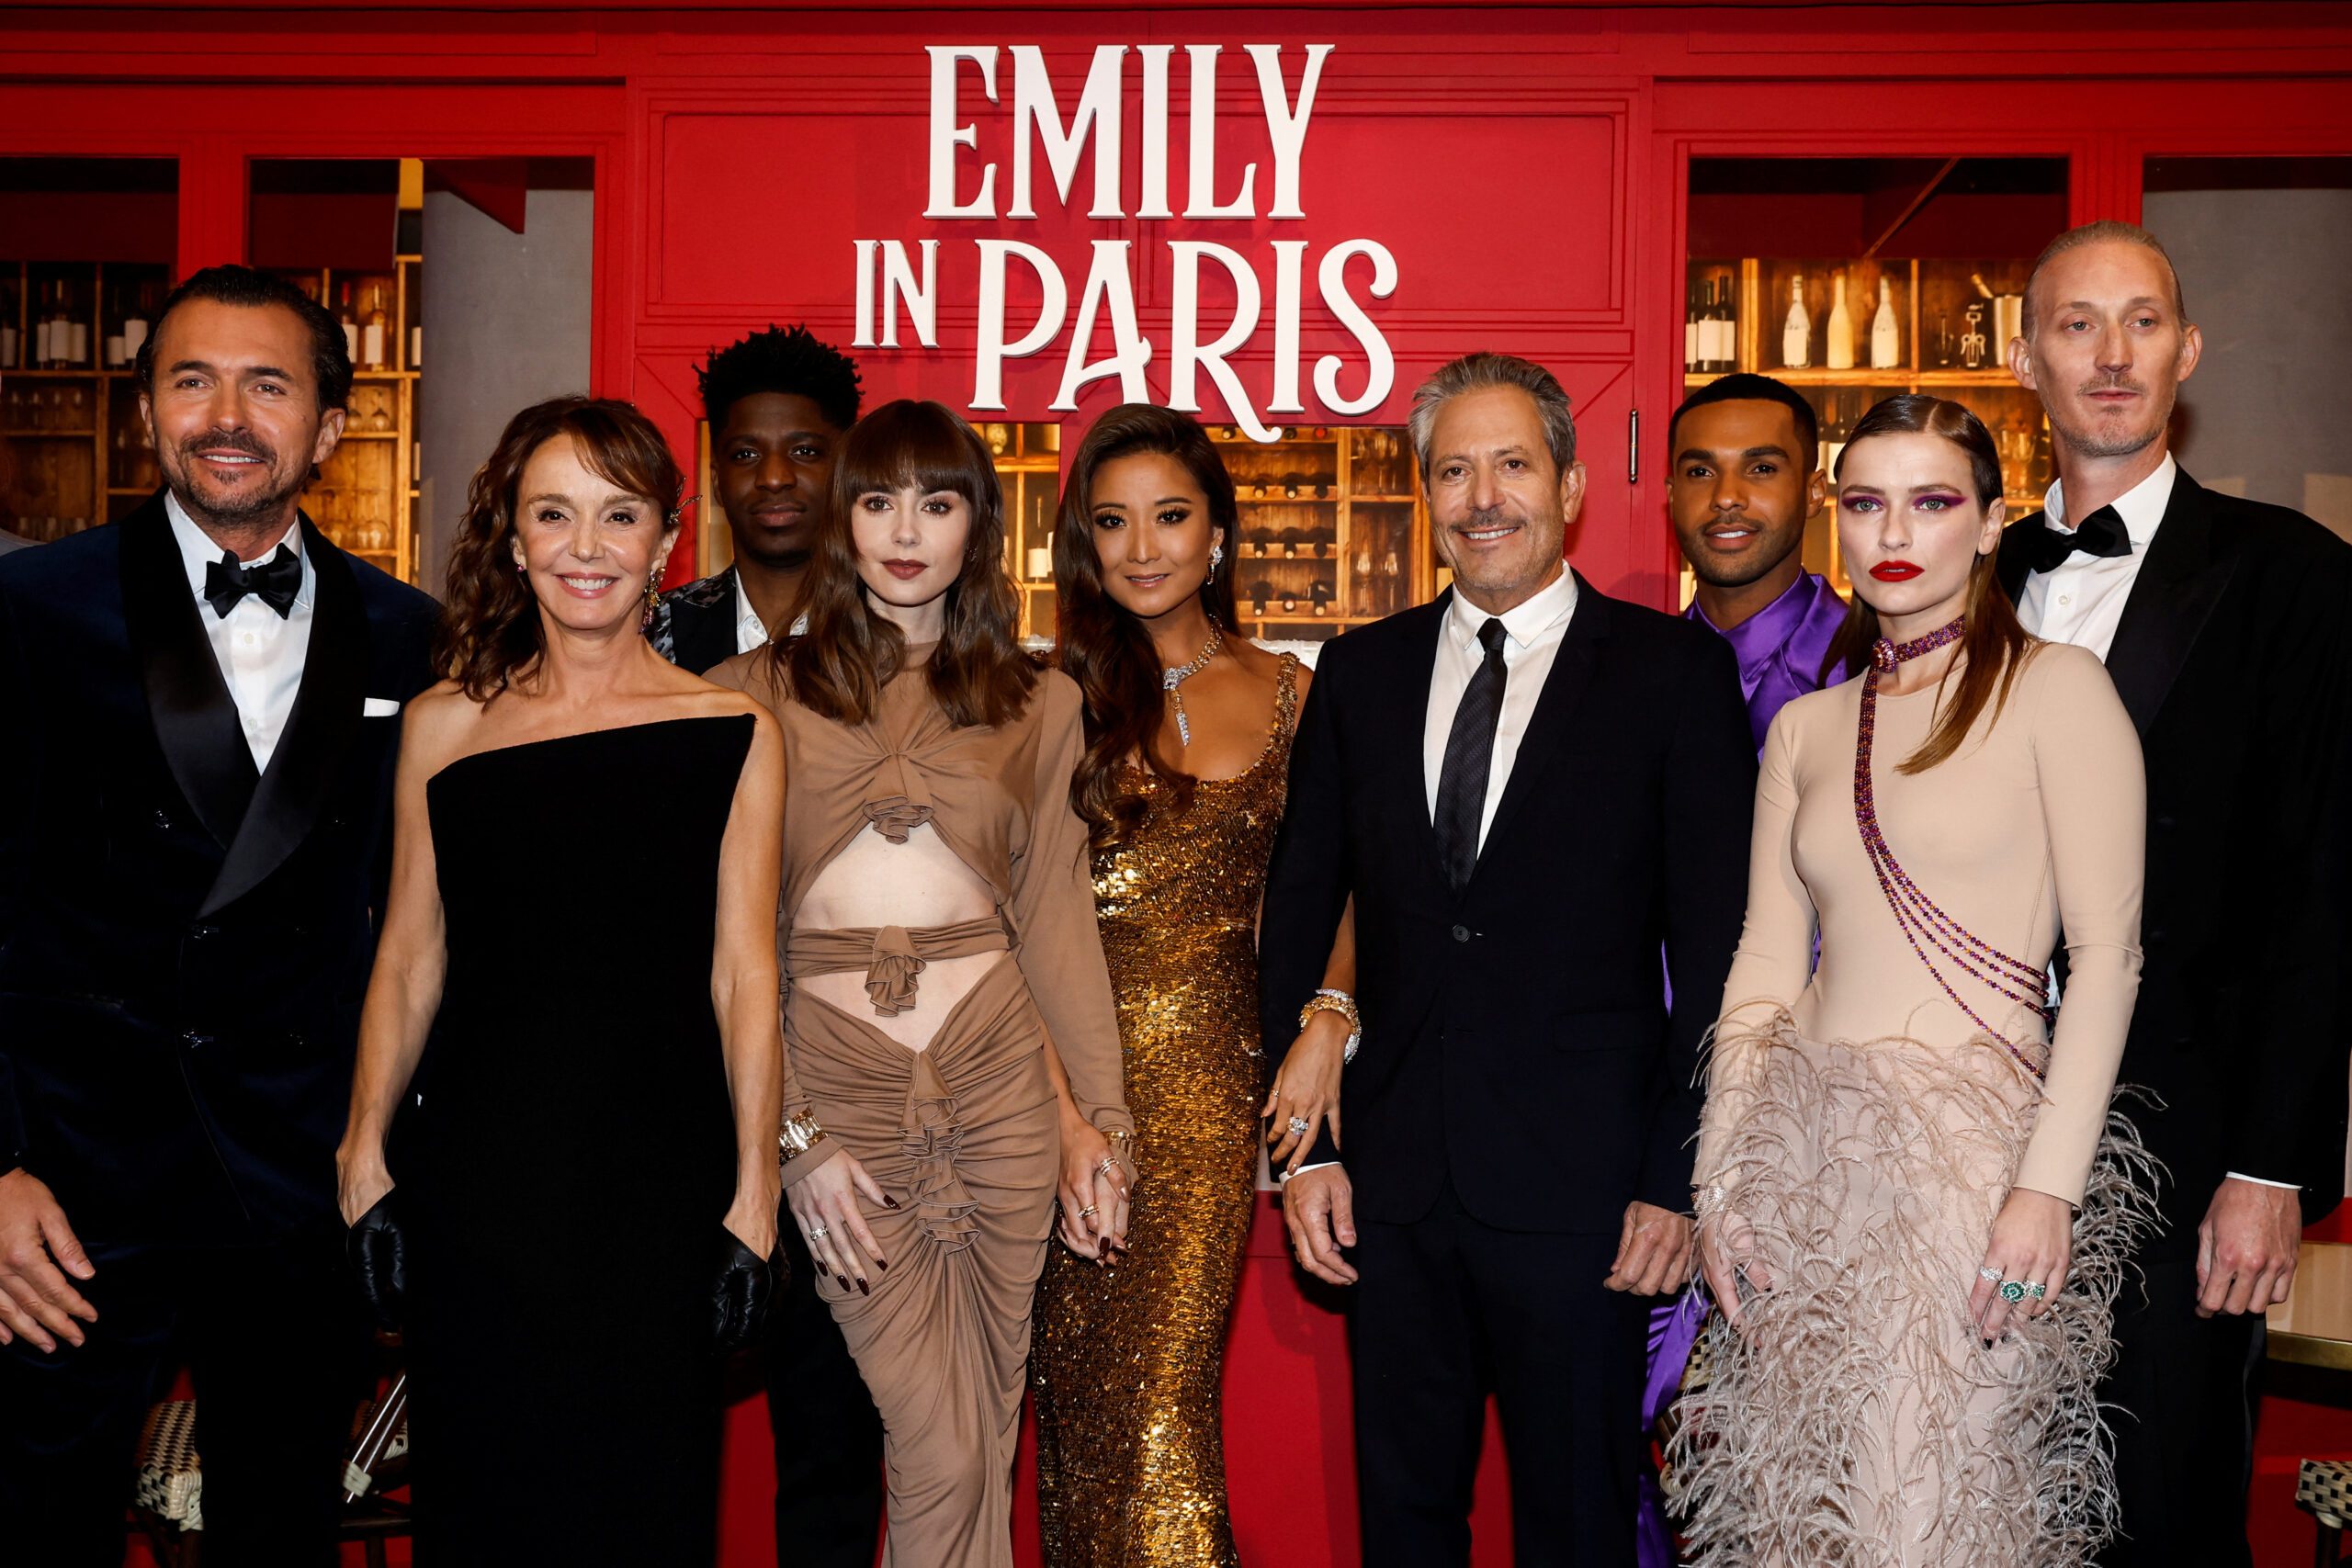 2022 12 06T215817Z 1407612519 RC2J0Y9LWTPH RTRMADP 3 TELEVISION EMILY IN PARIS Scaled ?resize=2560%2C1707&zoom=1